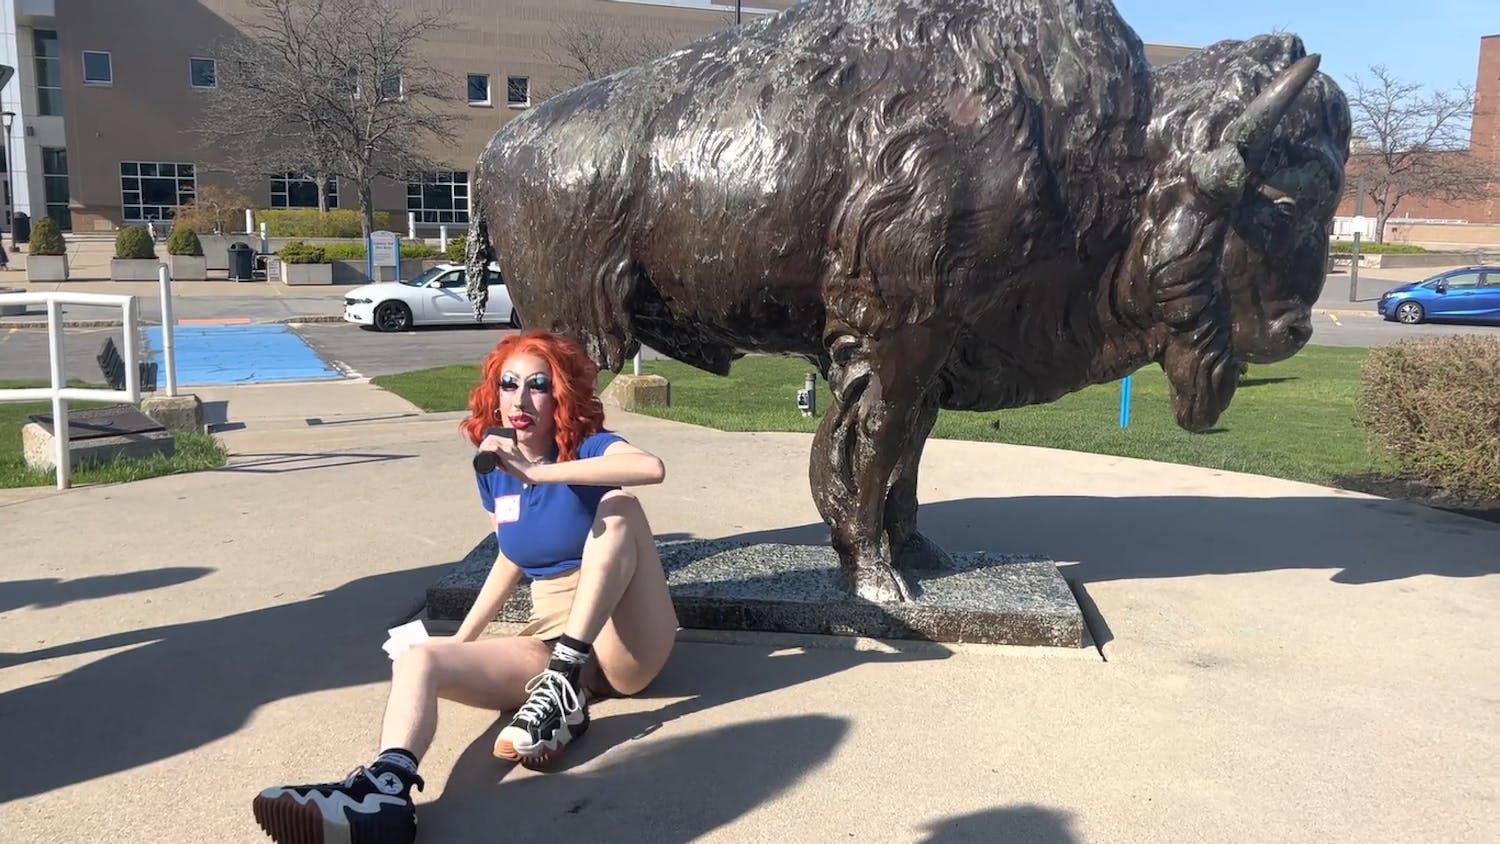 Mx. Ology demonstrated an invented UB tradition on their tour: rubbing the bull’s penis to ensure a timely graduation.&nbsp;